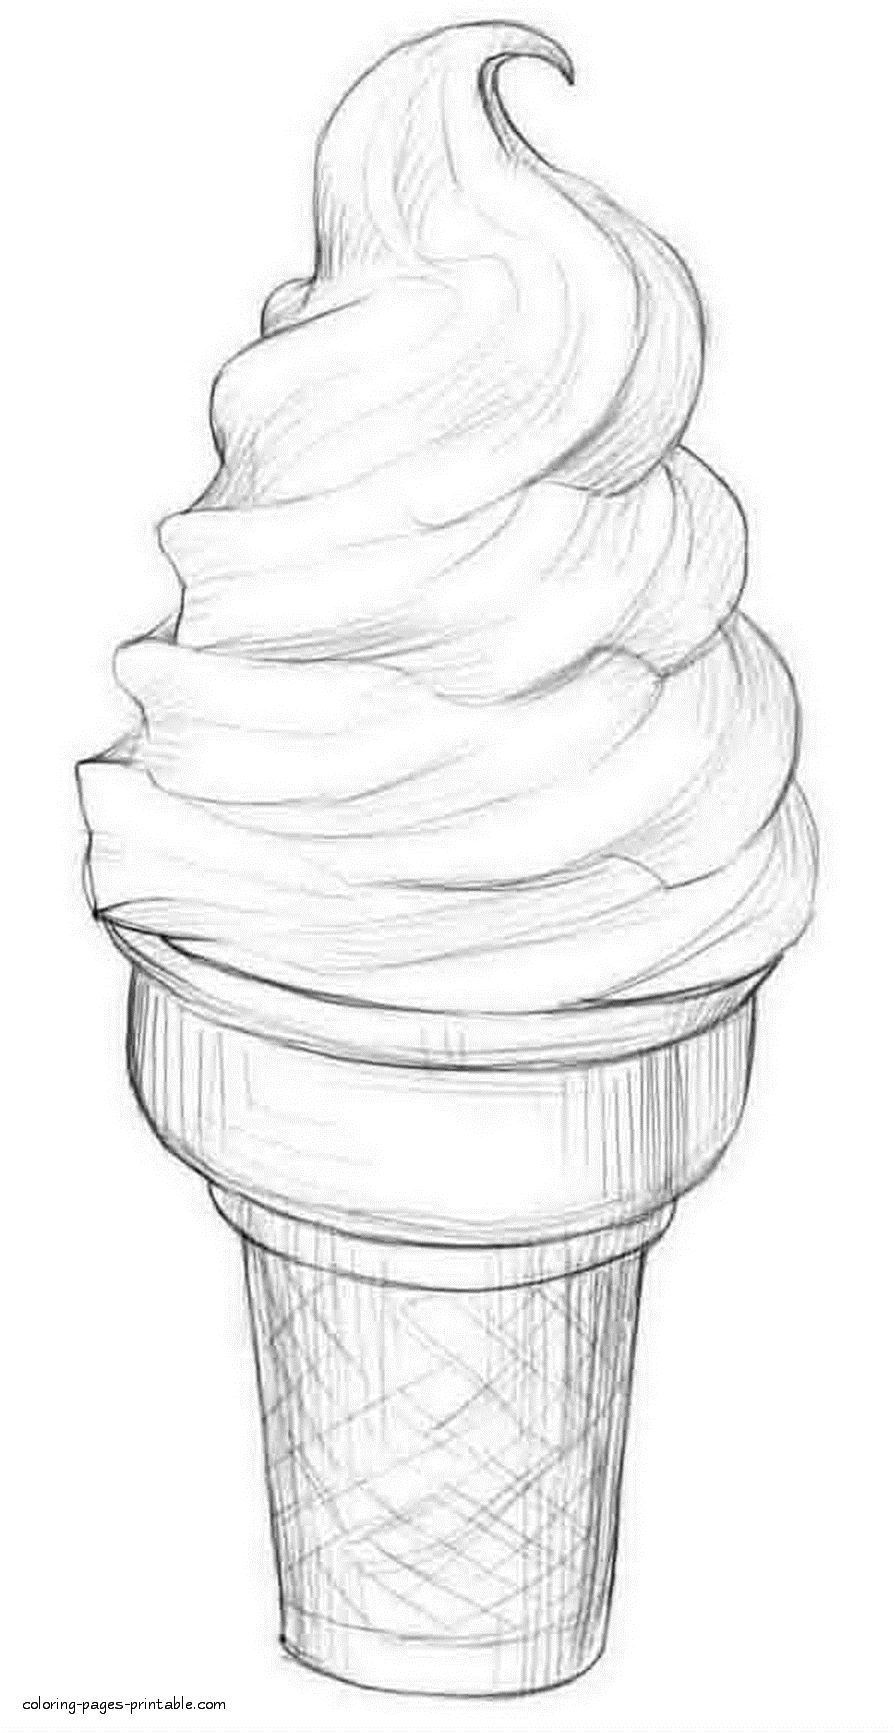 ice cream cone to print and color coloring pages printablecom